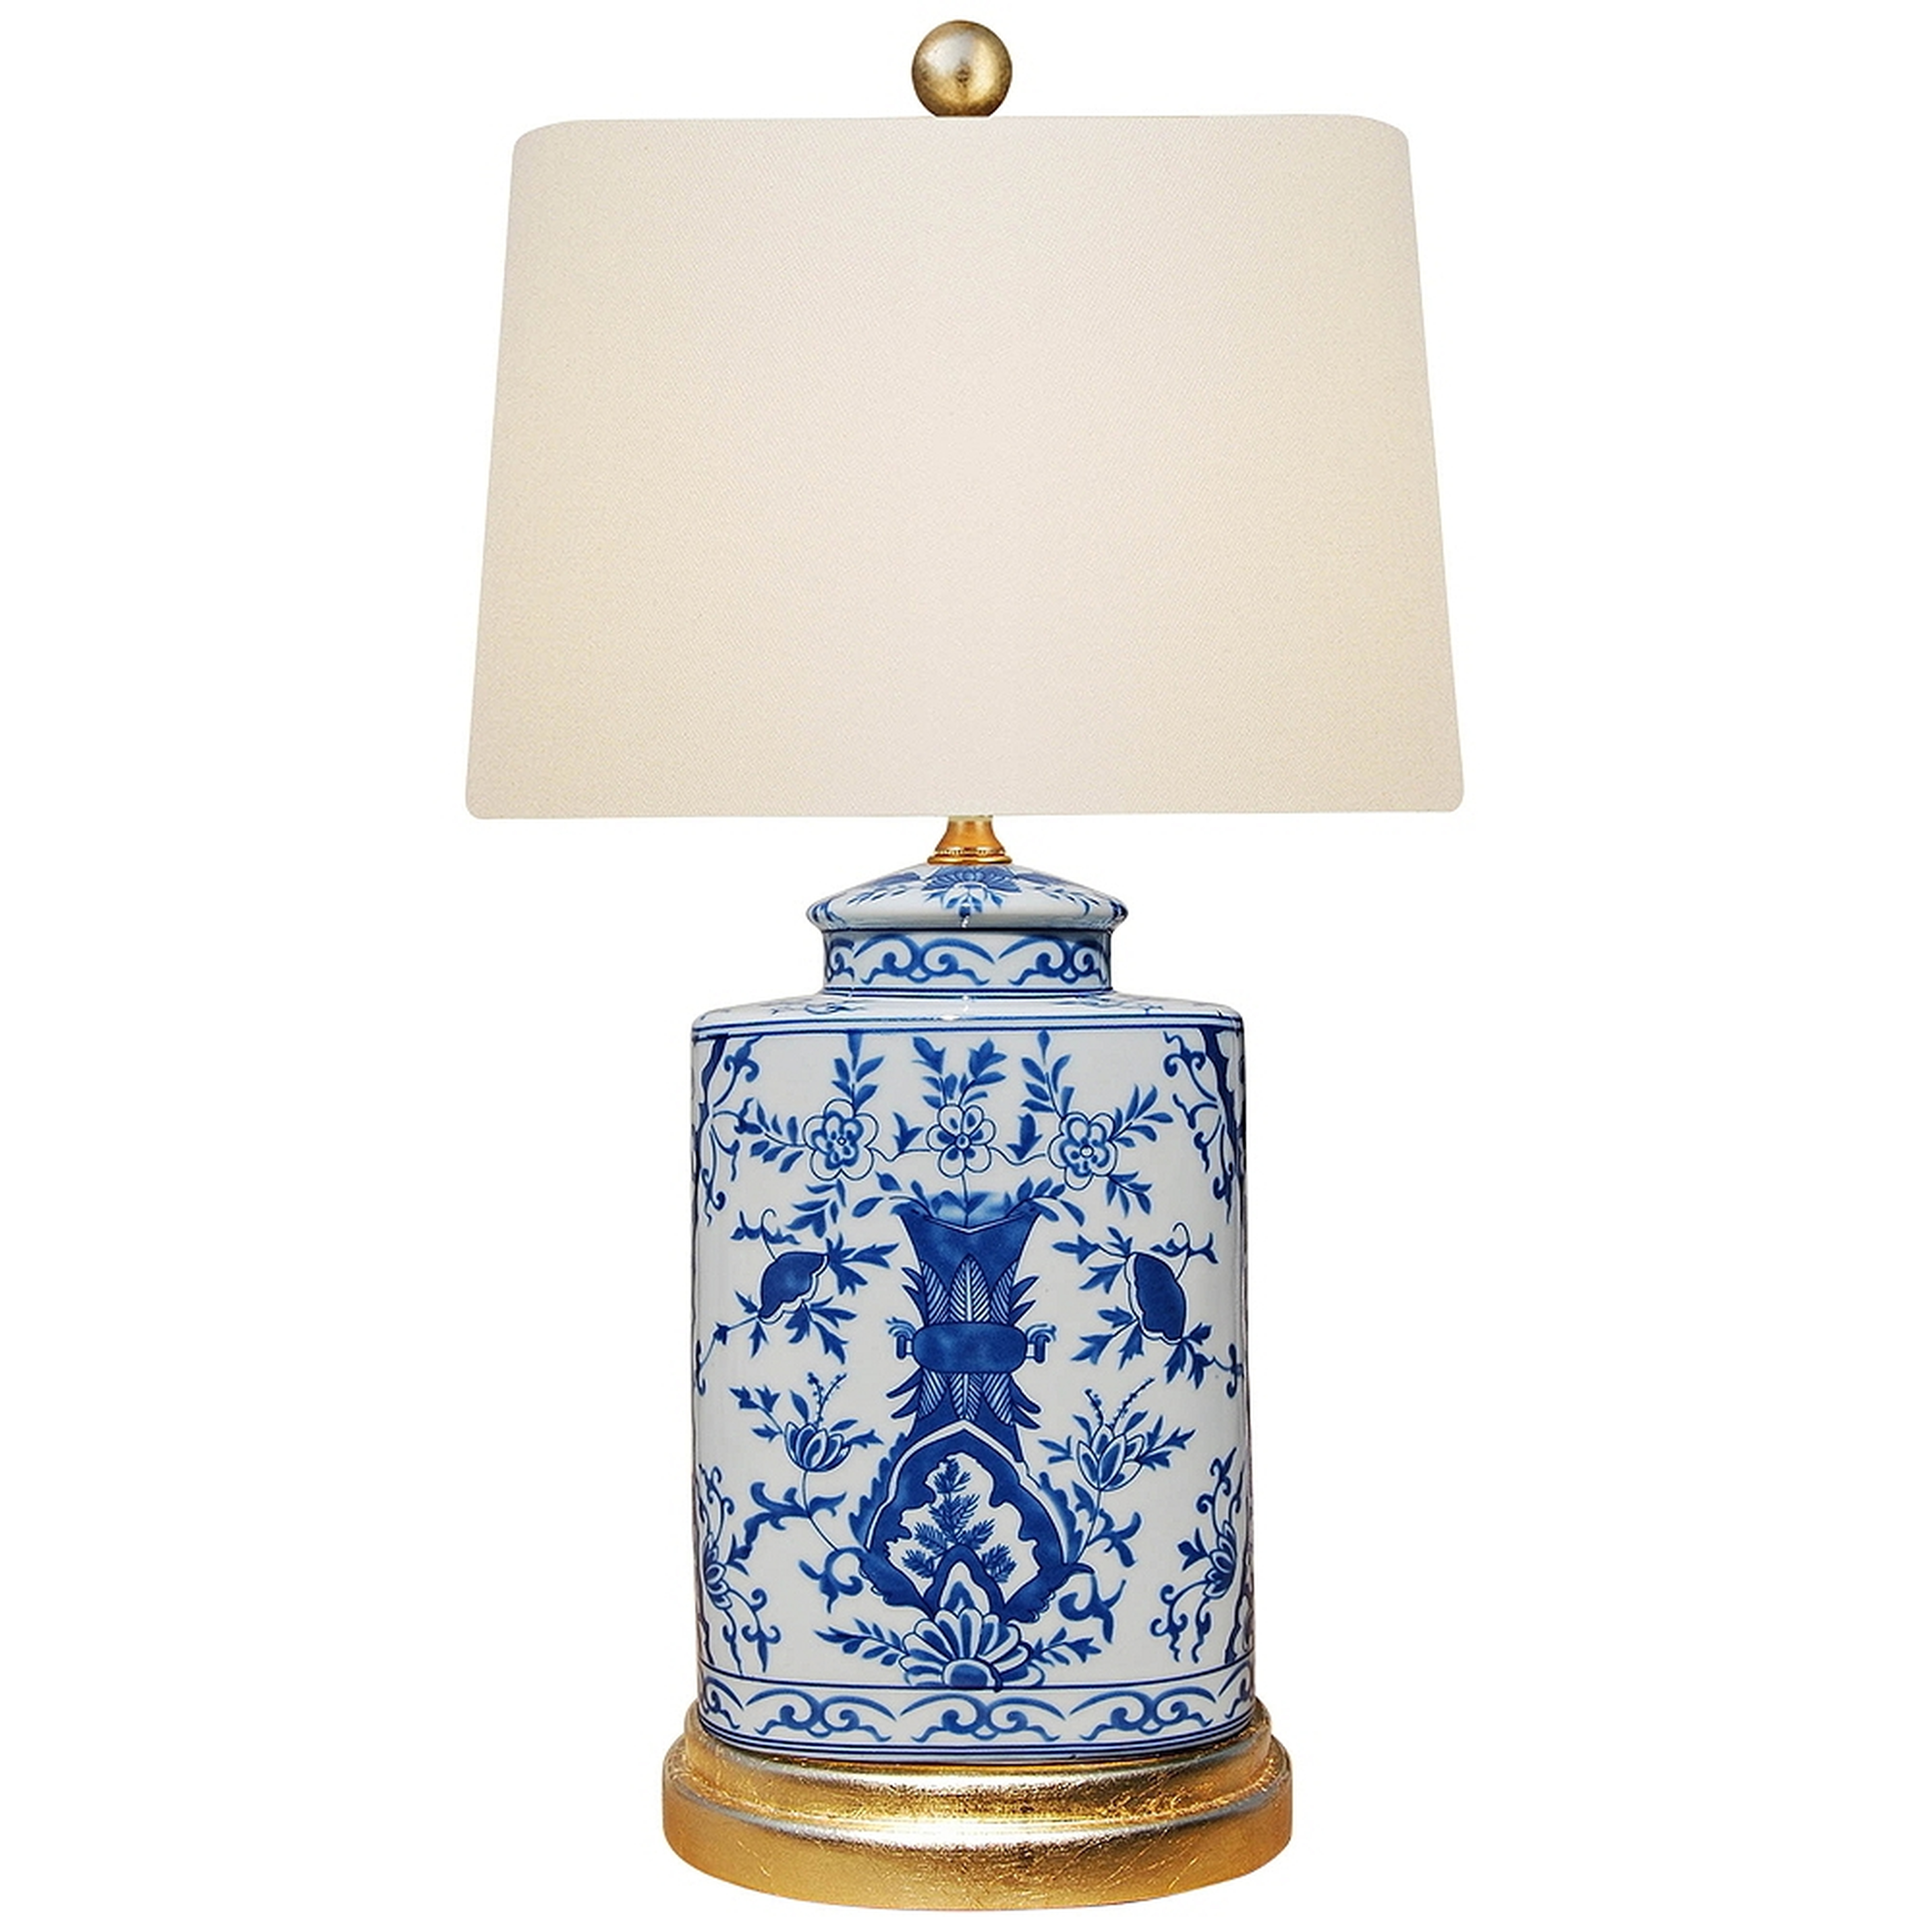 Akeno Blue and White Porcelain Oval Jar Accent Table Lamp - Style # 61Y23 - Lamps Plus